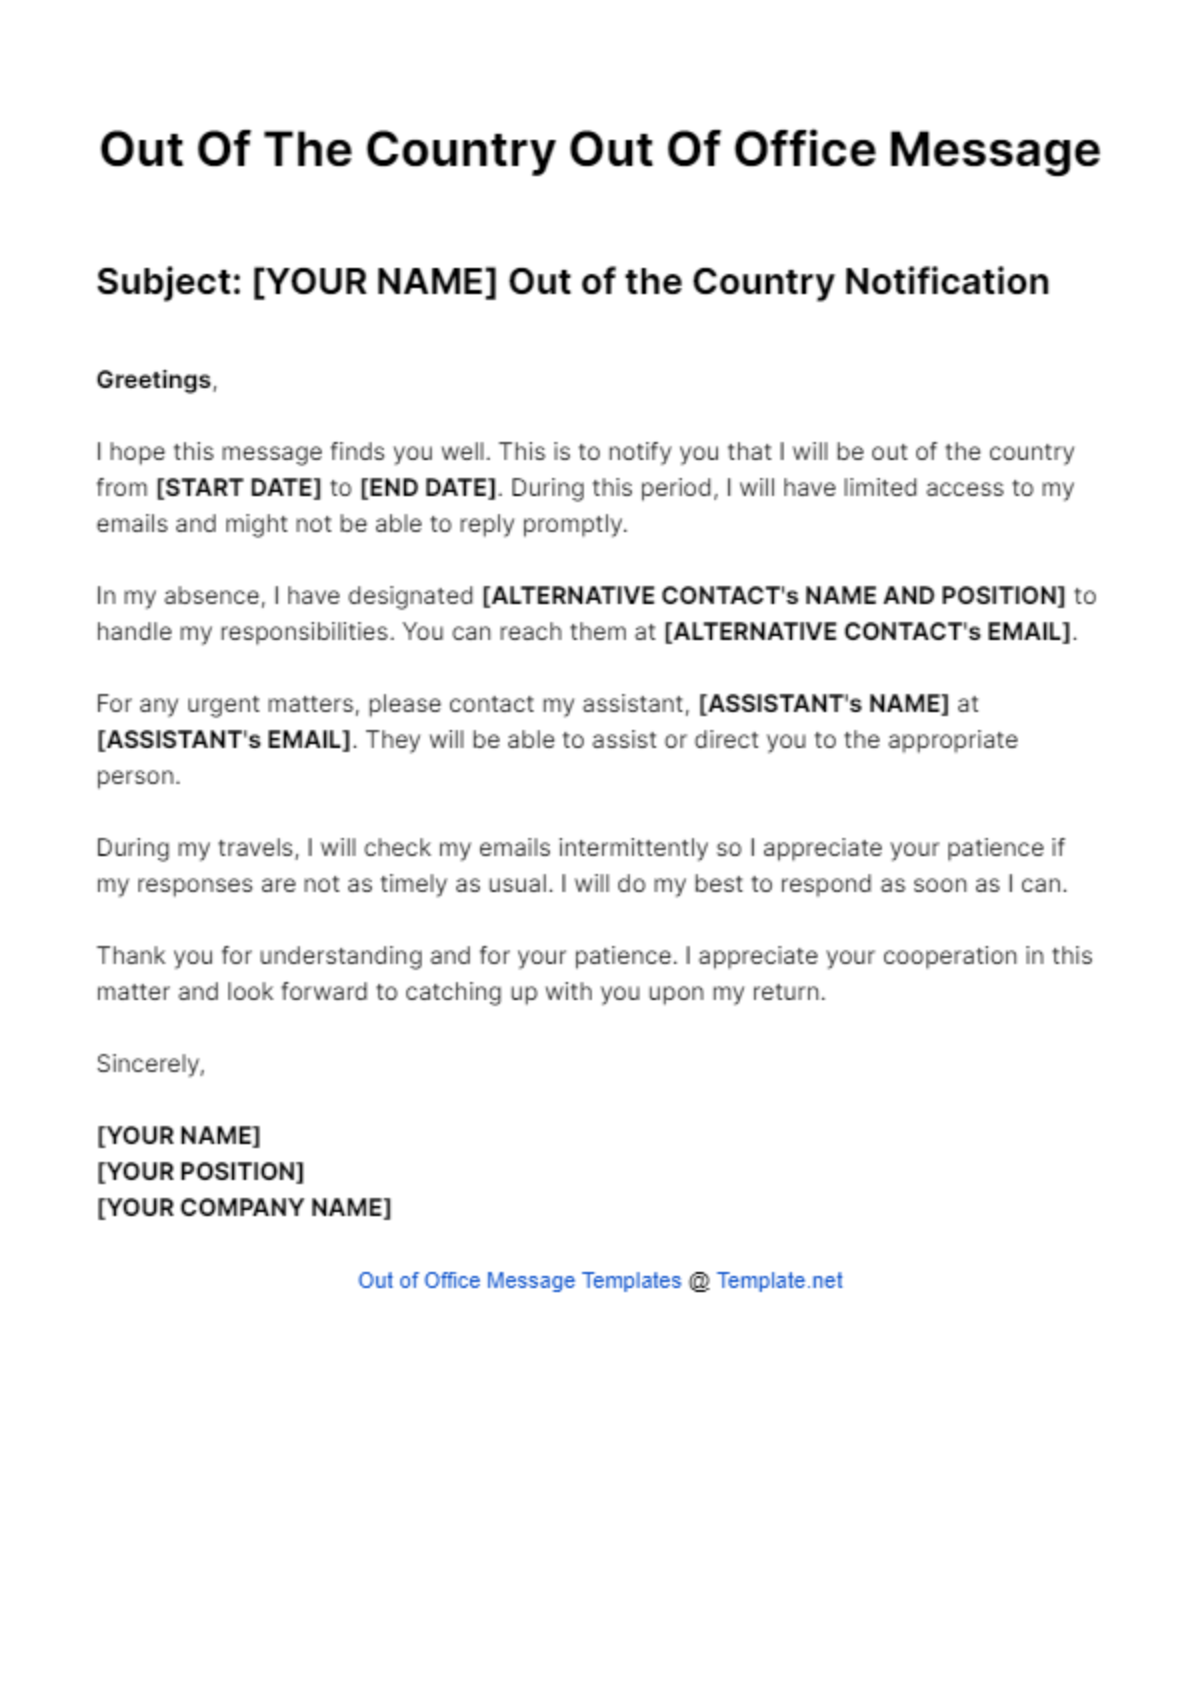 Out Of The Country Out Of Office Message Template